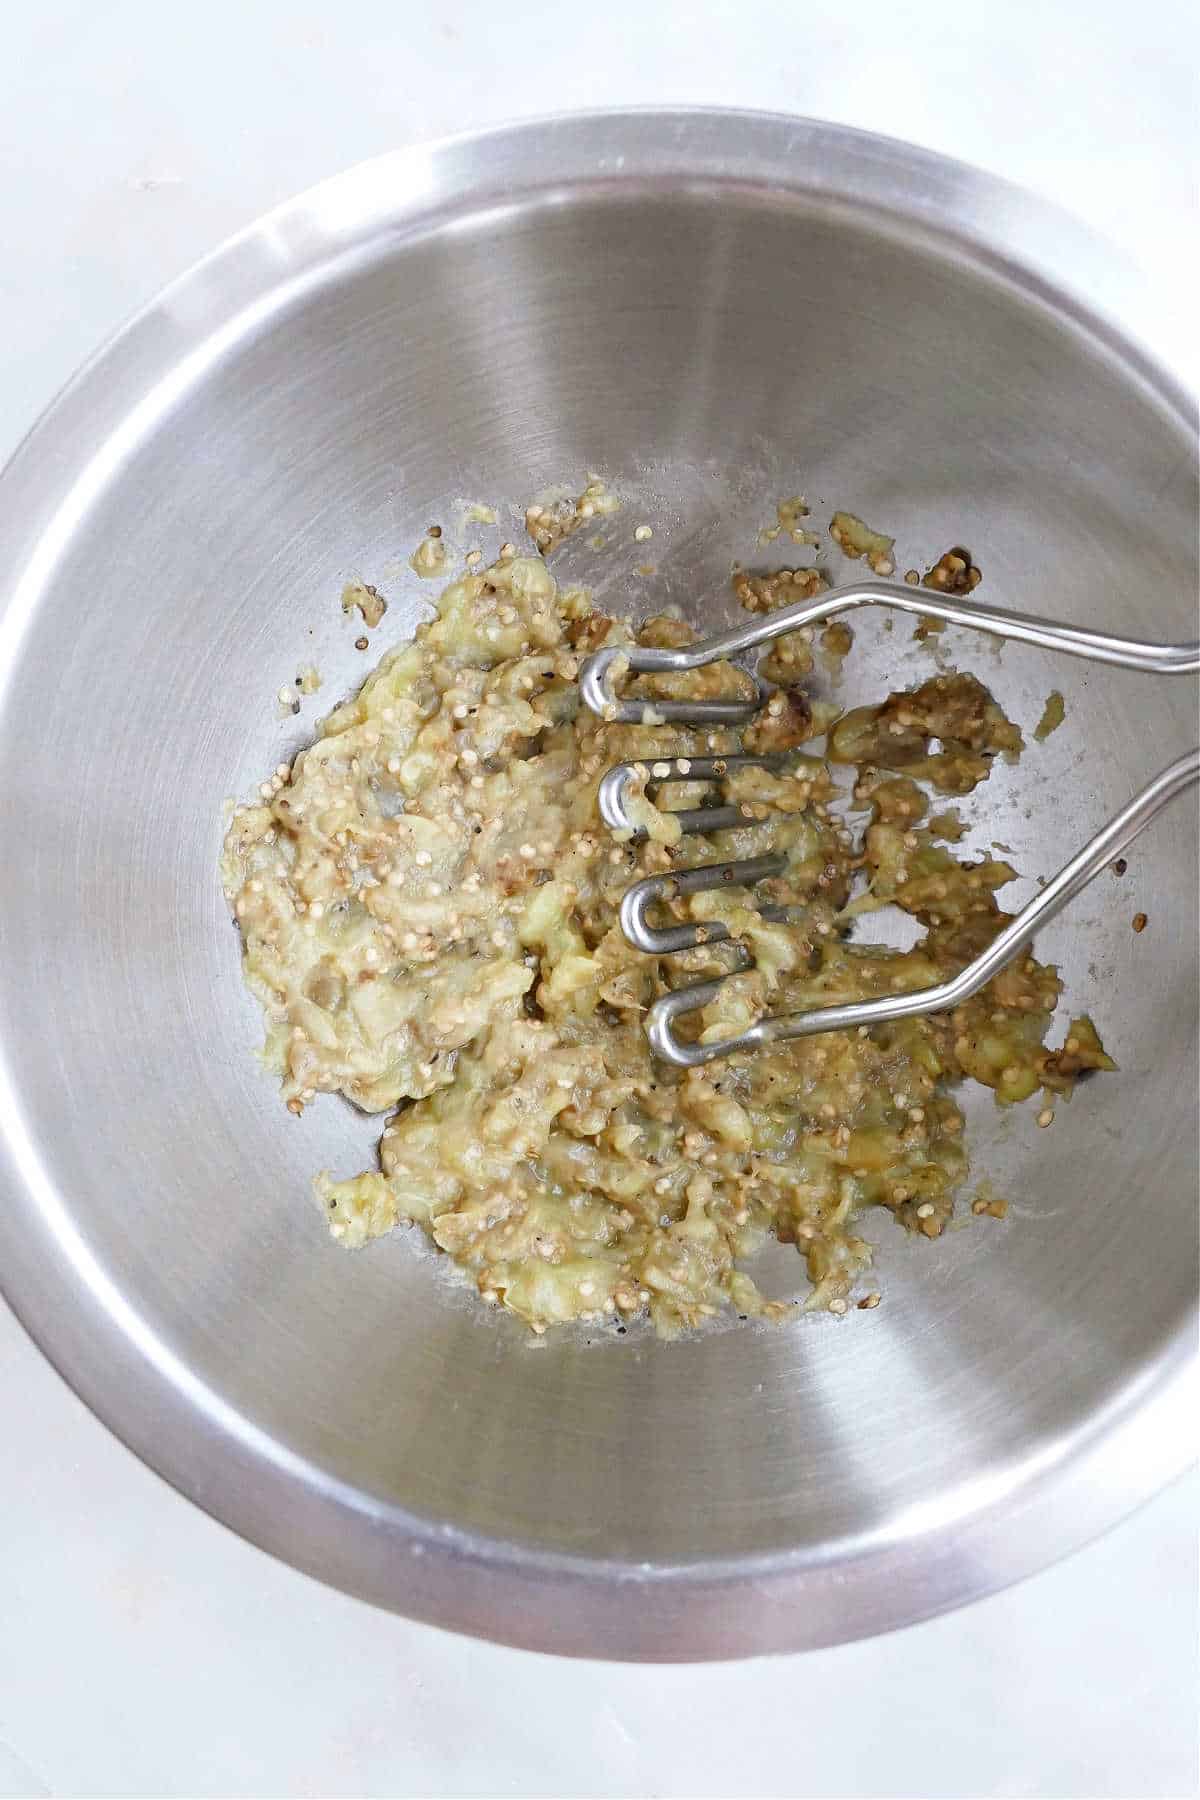 cooked eggplant being mashed in a mixing bowl with a potato masher